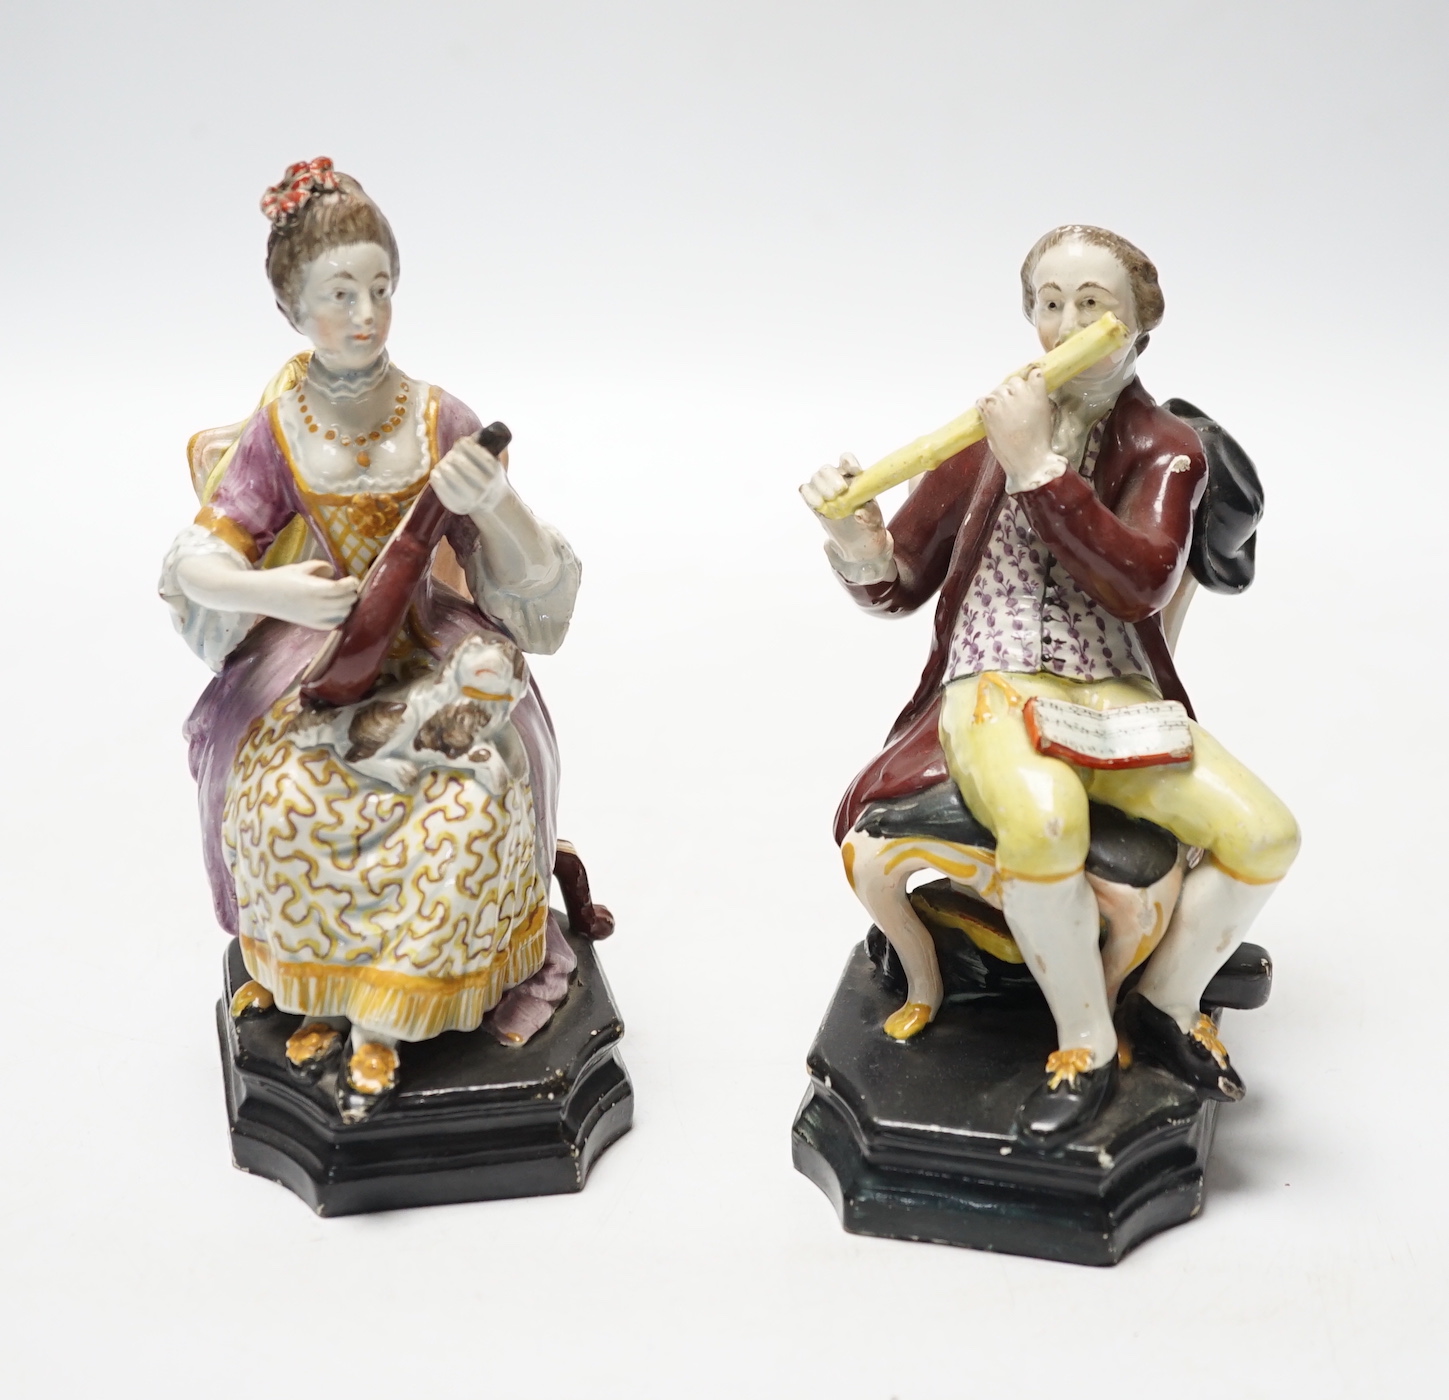 A pair of Staffordshire pearlware figures of musicians seated on chairs, c.1825, 14cm